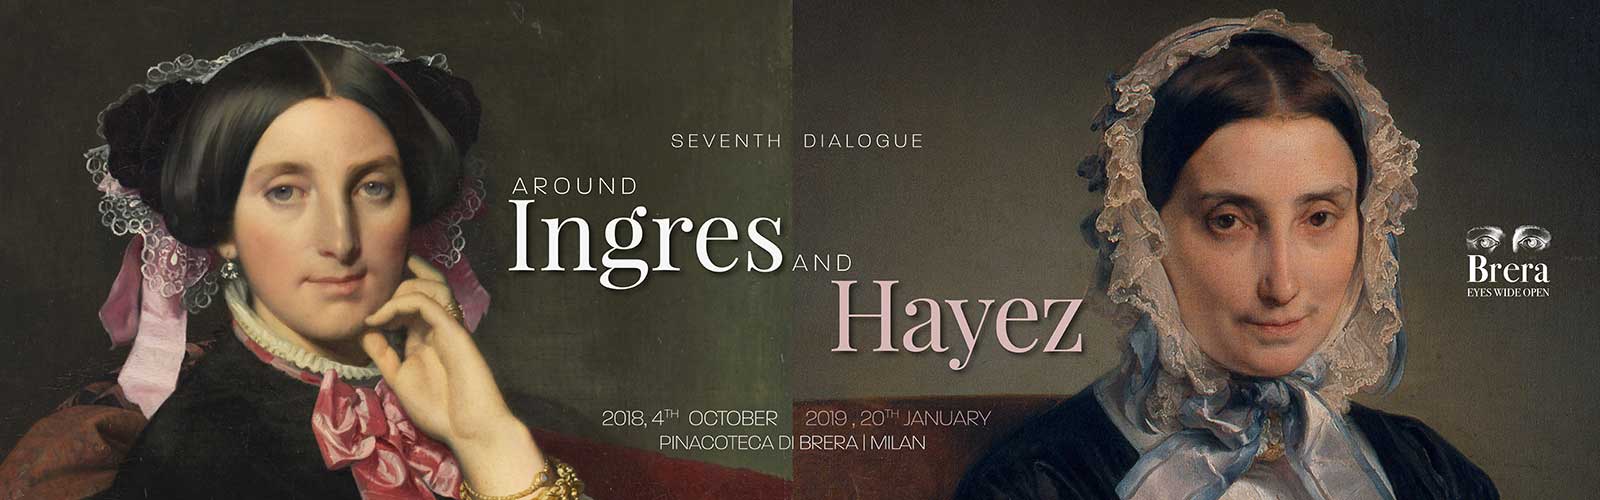 Opening of the Seventh Dialogue with free admission